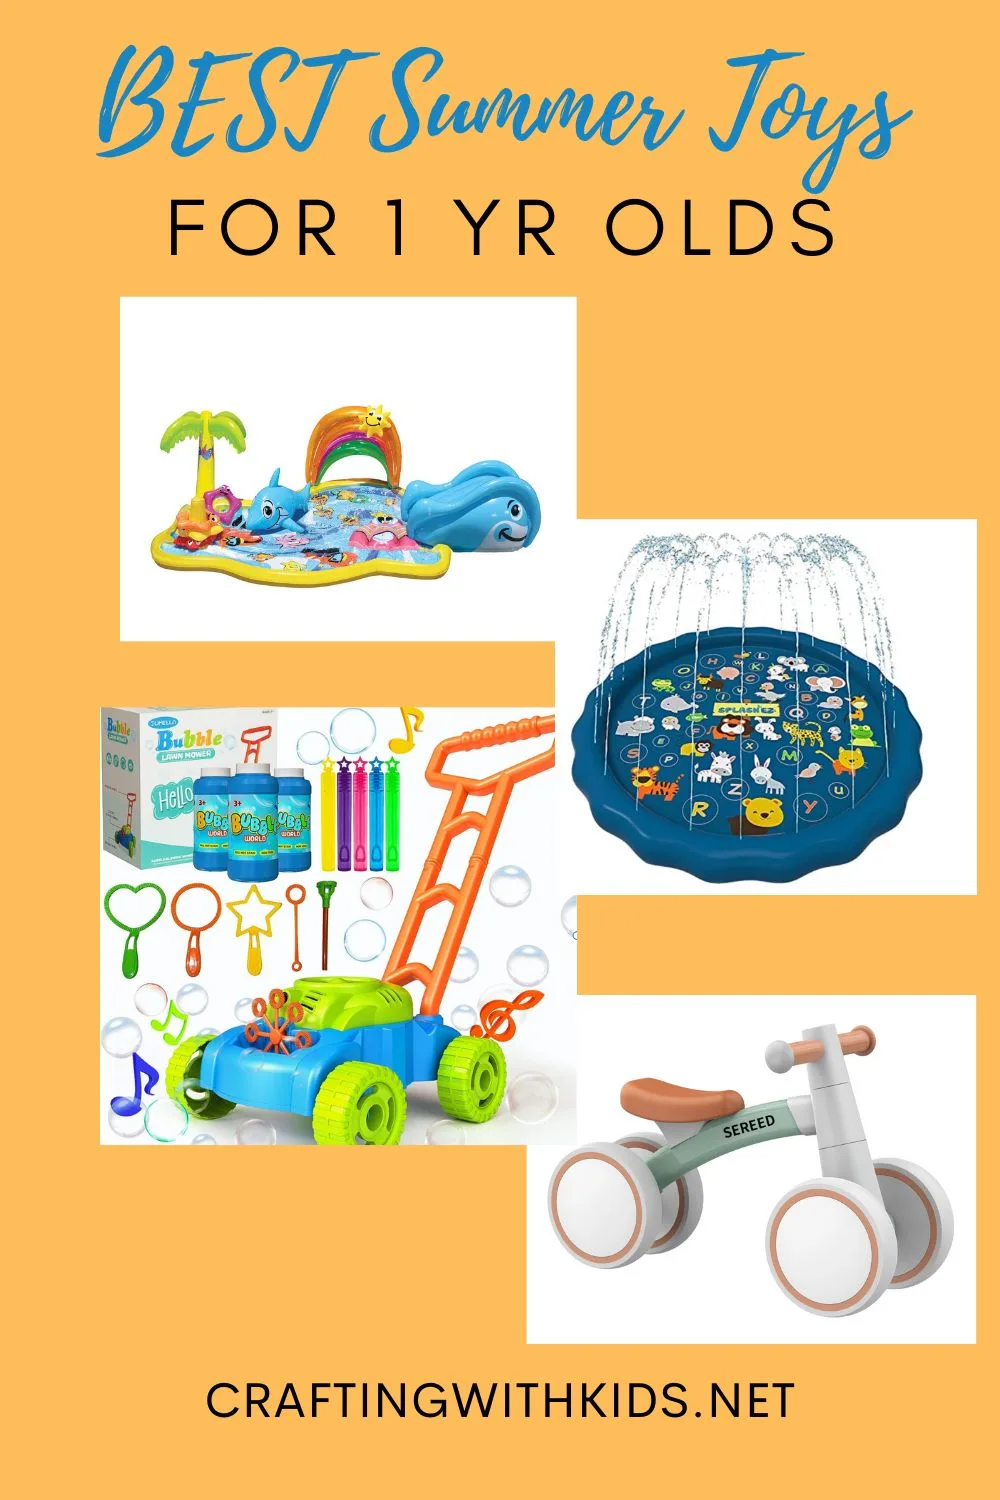 summer toys for 1 yr old